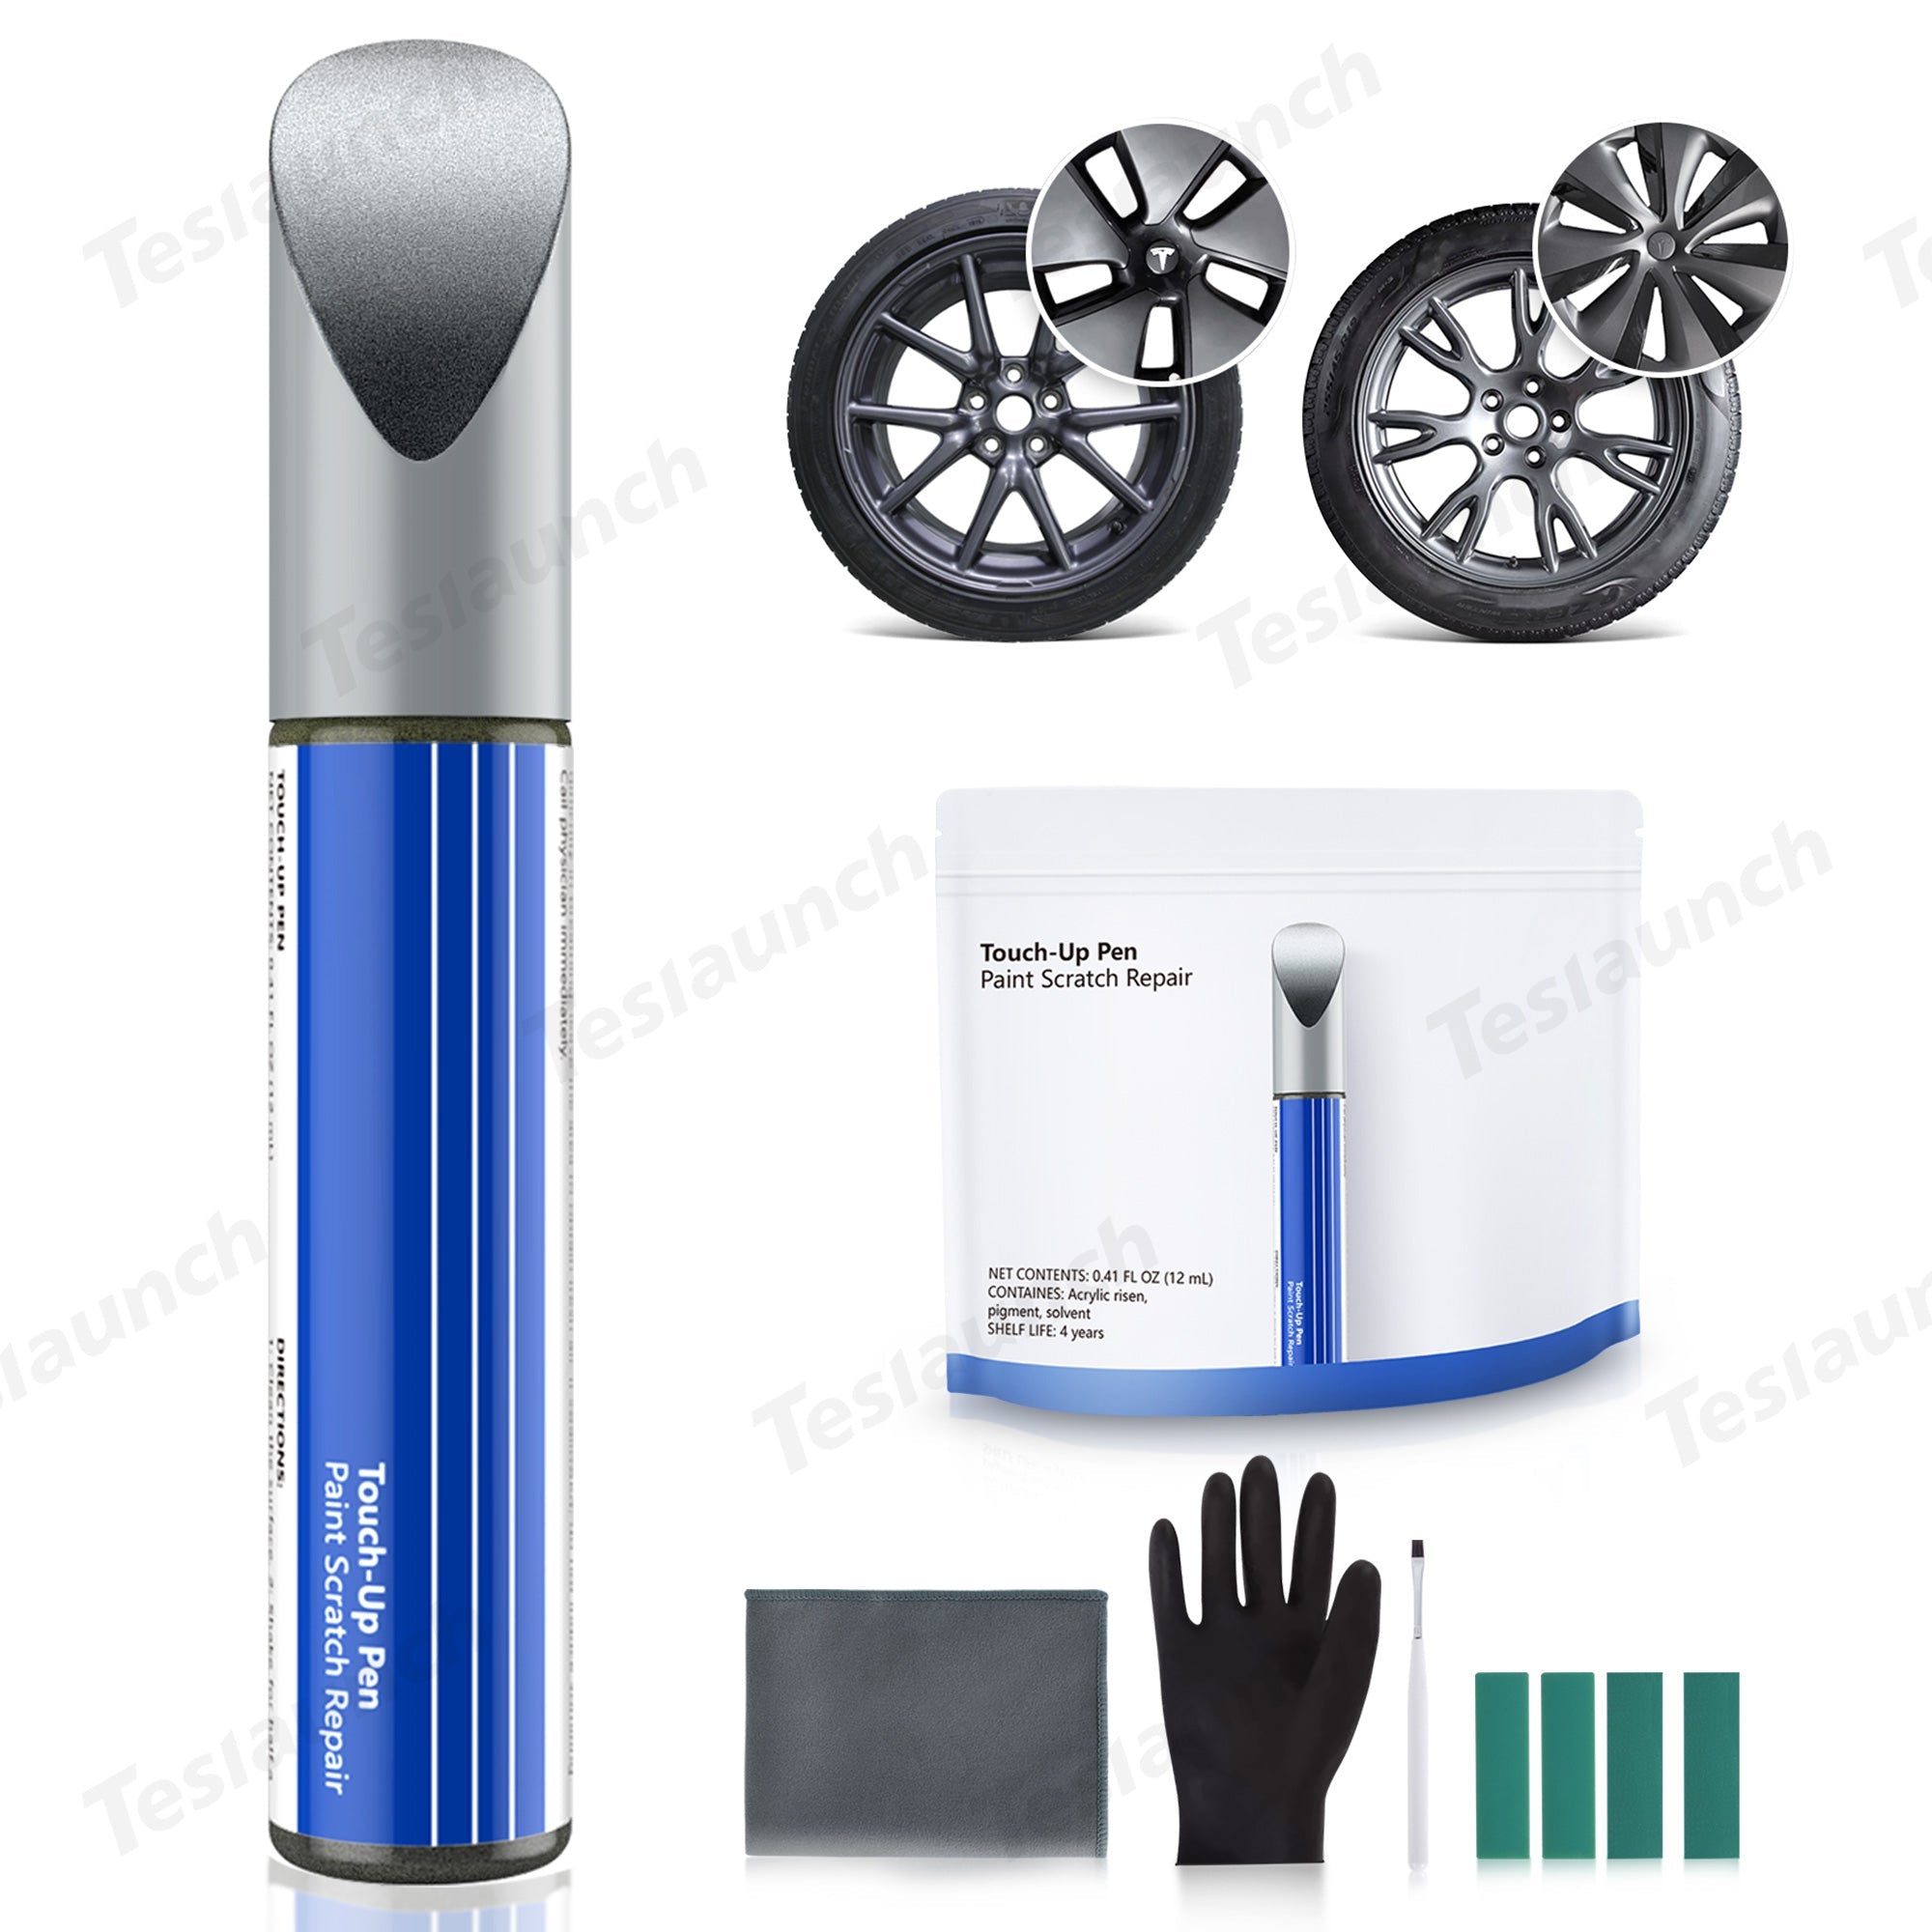 Tesla Wheel Rims Touch Up Paint Kit for Model 3/Y/S/X - DIY Curb Rash Repair with Color-matched Touch Up Paint